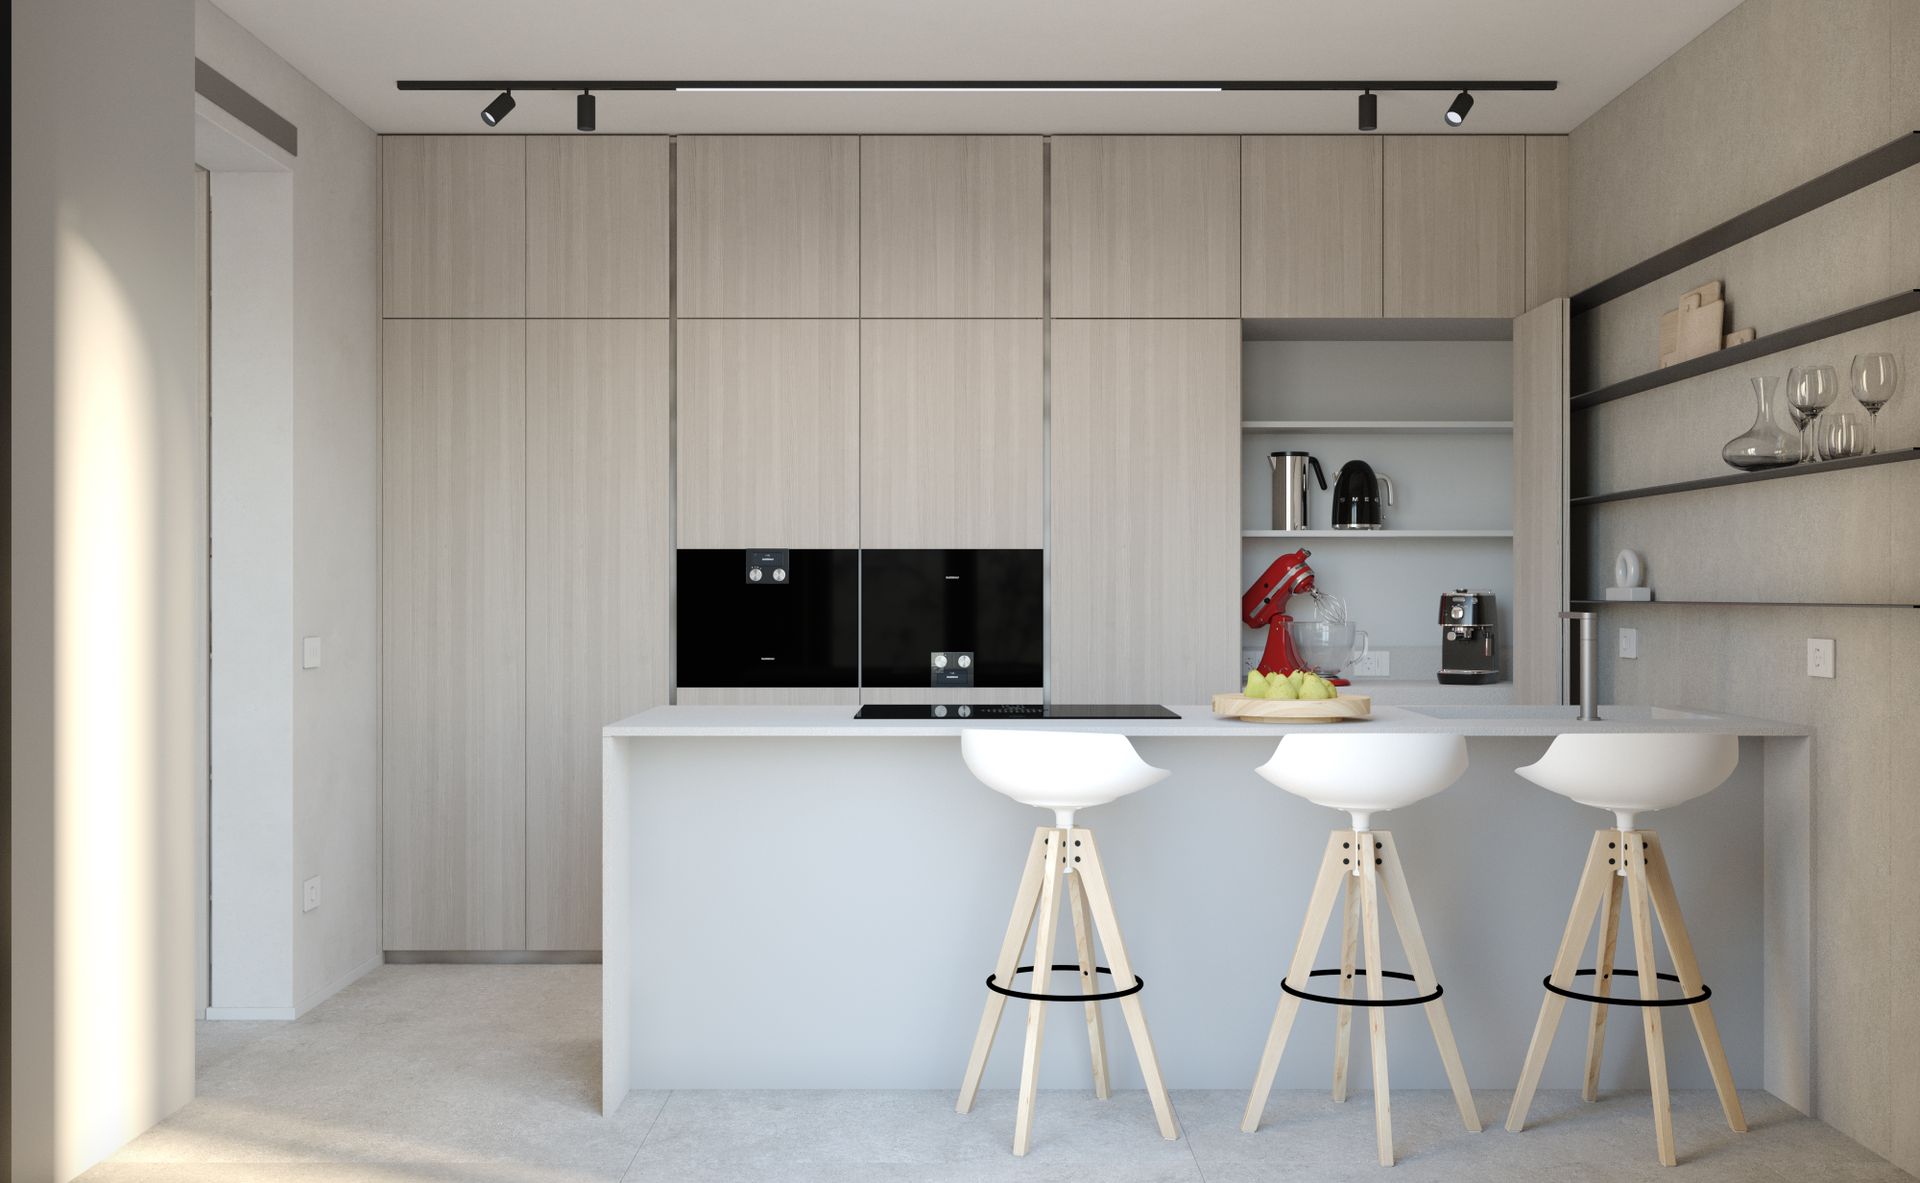 Interior design project, apartment renovation, study of spaces and surfaces, island kitchen with wood paneling. Officina Magisafi architecture design - kitchen rendering